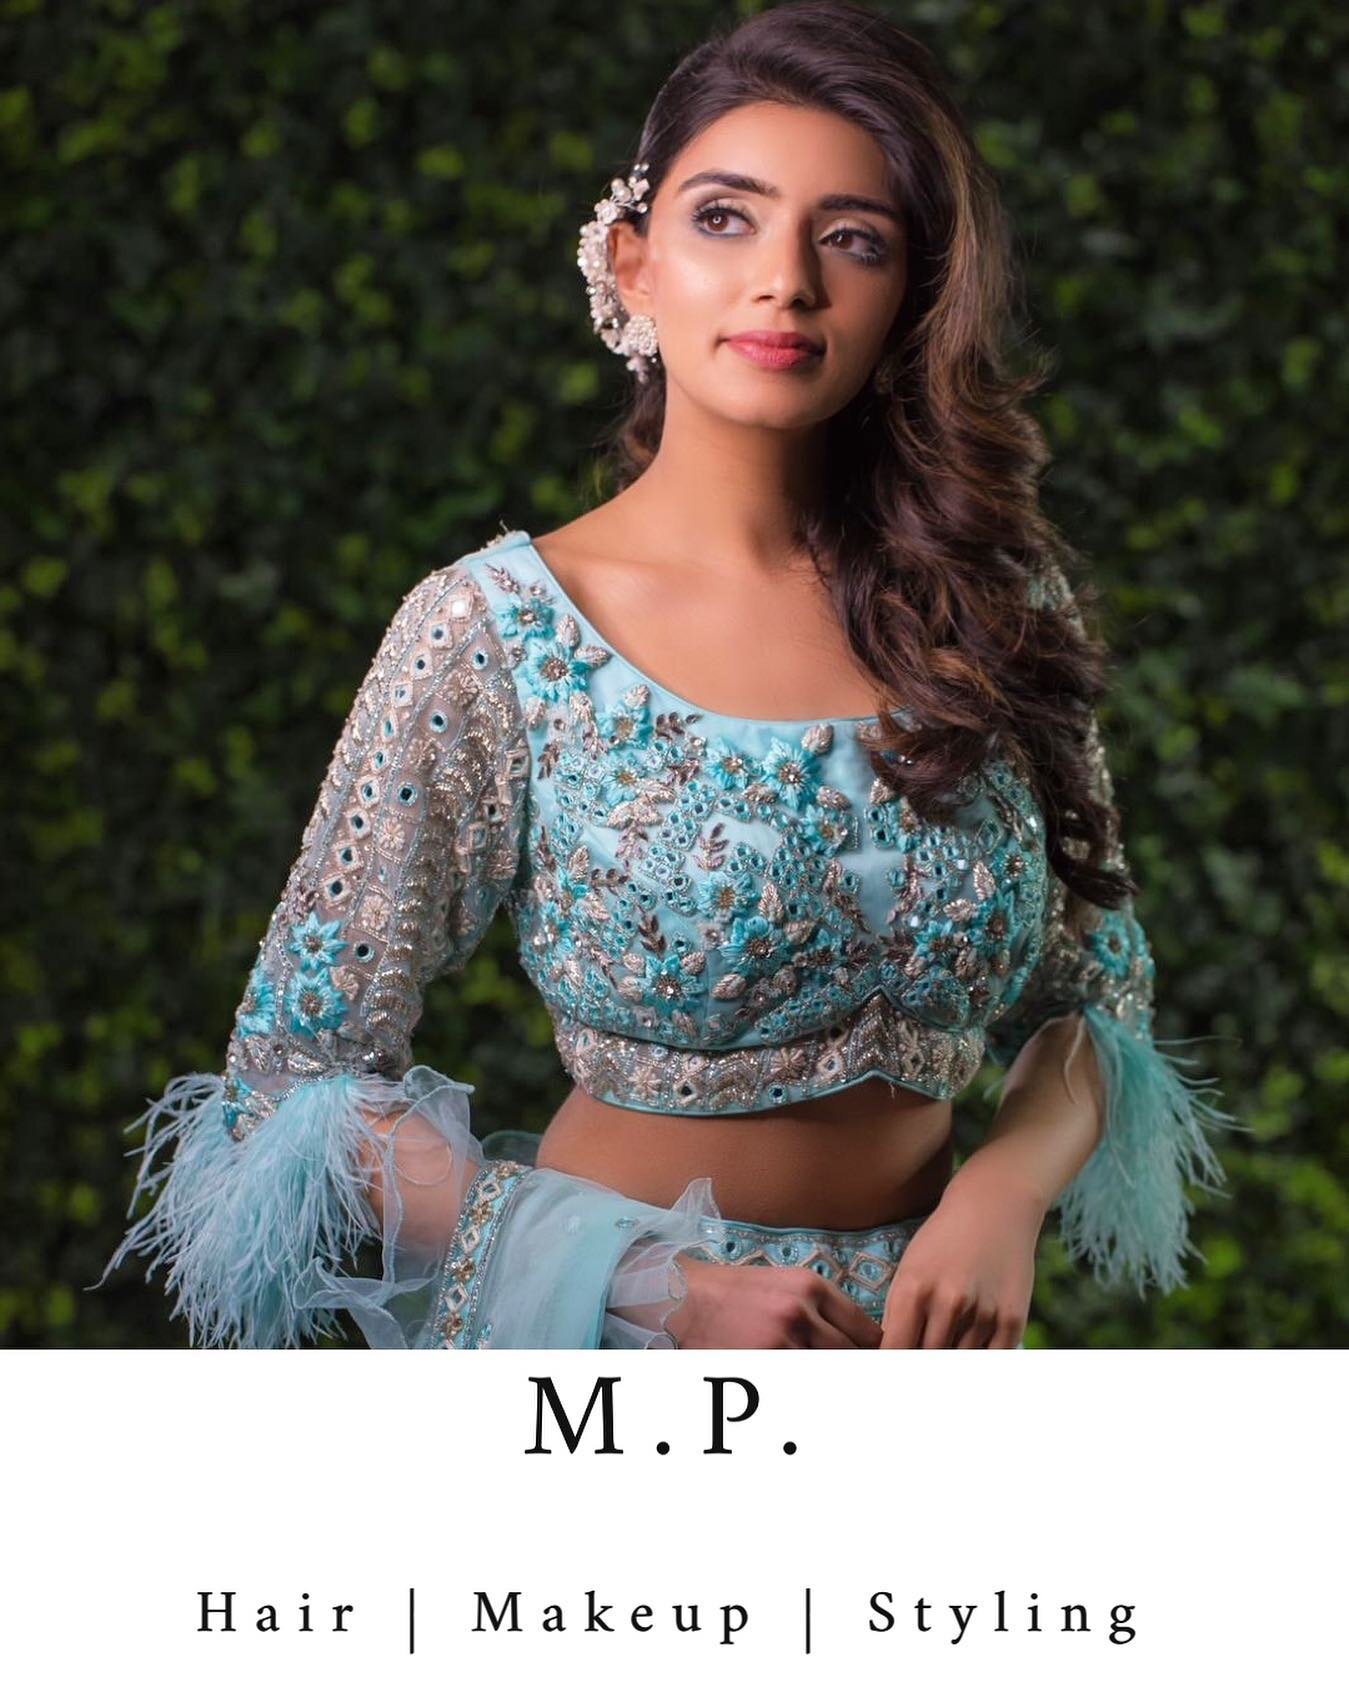 💄Stylist: M. P. 
📍Location: Leicester - available to travel ----------------------------------------------------------------------------------
To BOOK 👉🏽 Email us at promakeuplondonstylists@gmail.com ----------------------------------------------